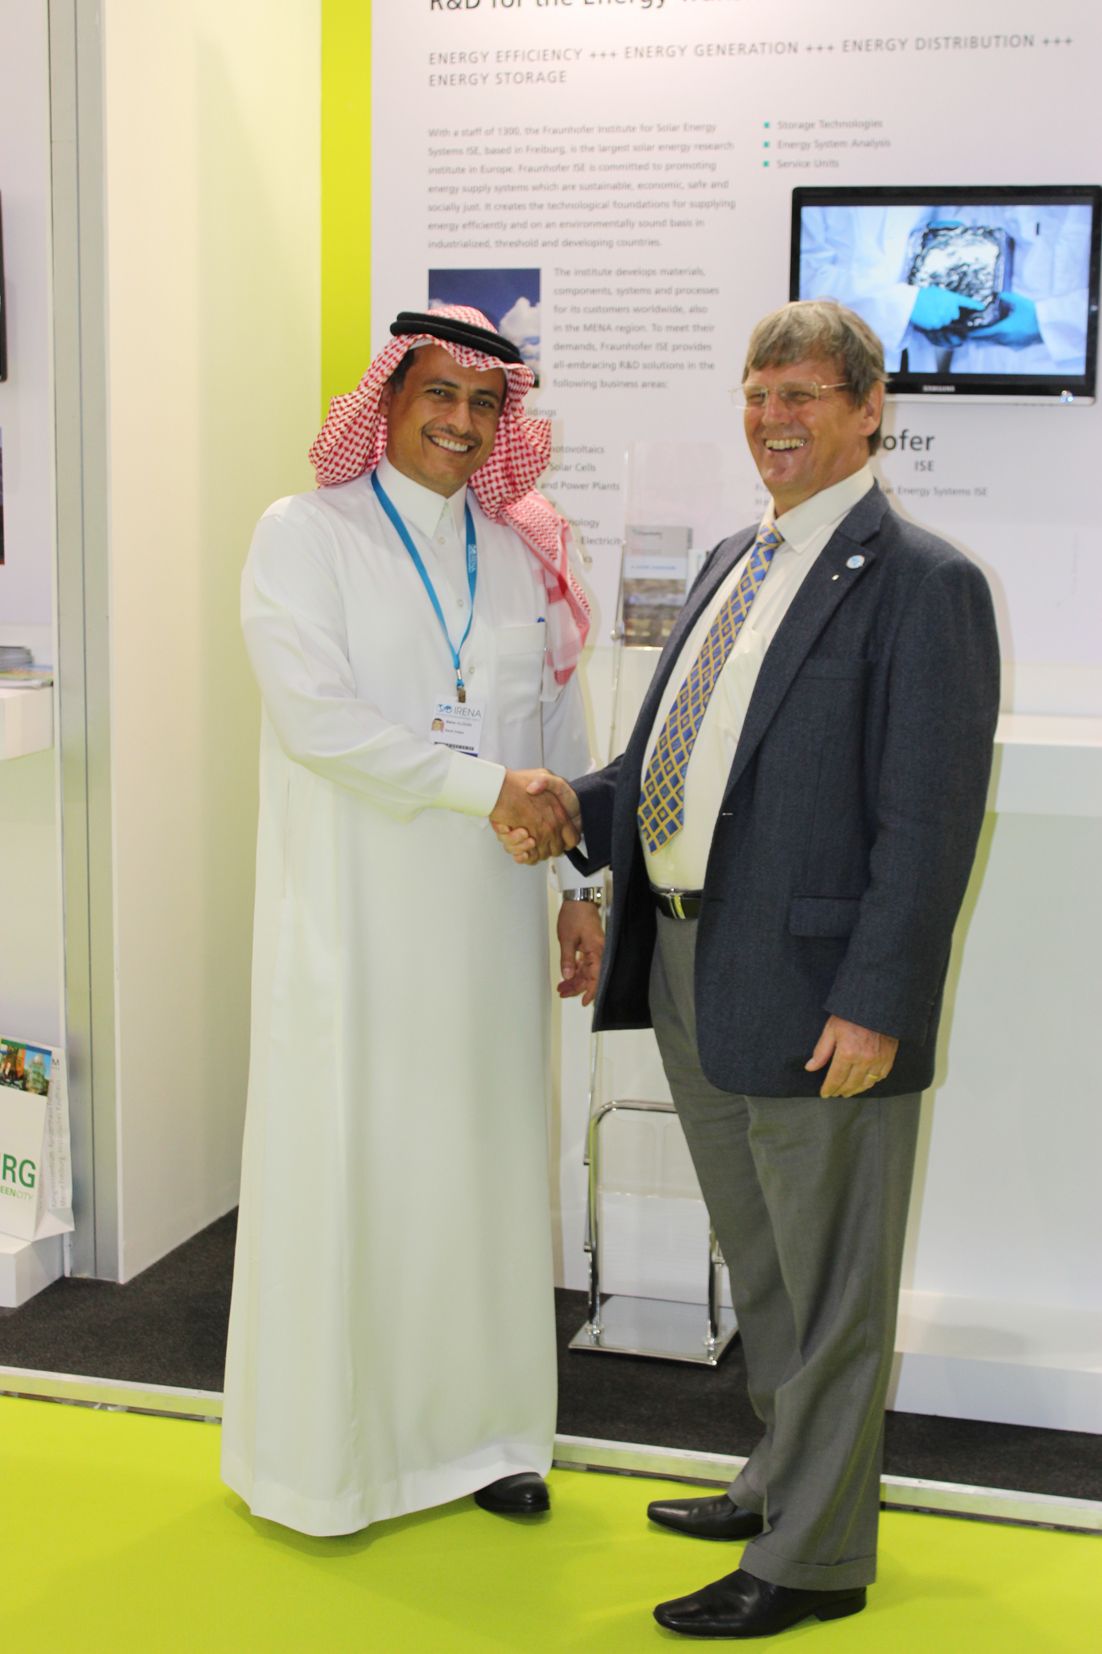 Dr. Mahar Alodan, King Abdullah City for Atomic &amp; Renewable Energy (K.A.CARE) (left) and Prof. Dr. Eicke R. Weber, Director of Fraunhofer ISE, during the signing ceremony at the German Pavillon at the World Future Energy Summit in Abu Dhabi on January 20, 2014